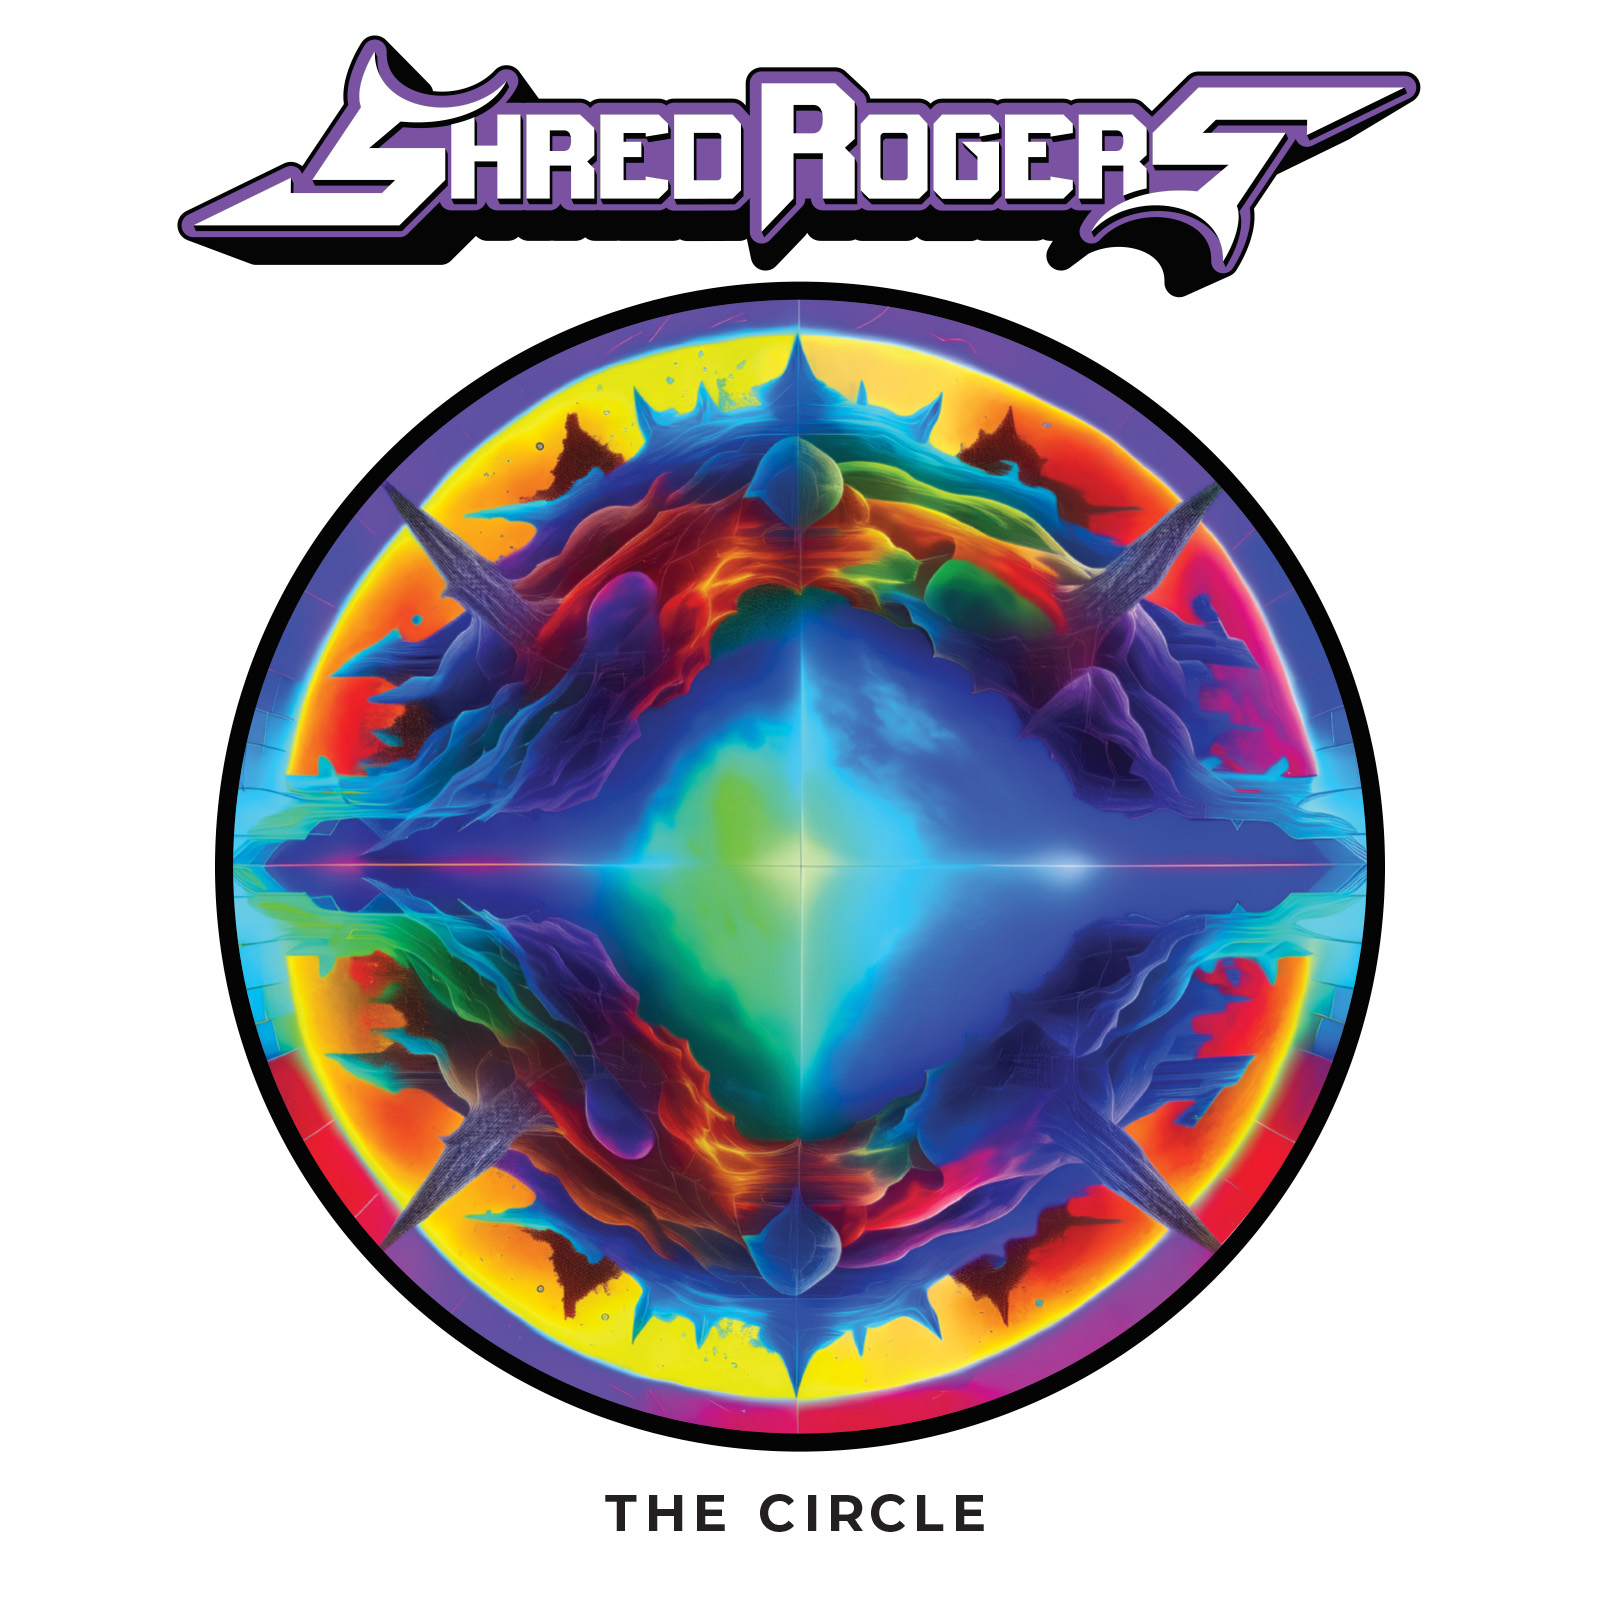 ALBUM REVIEW: The Circle by Shred Rogers